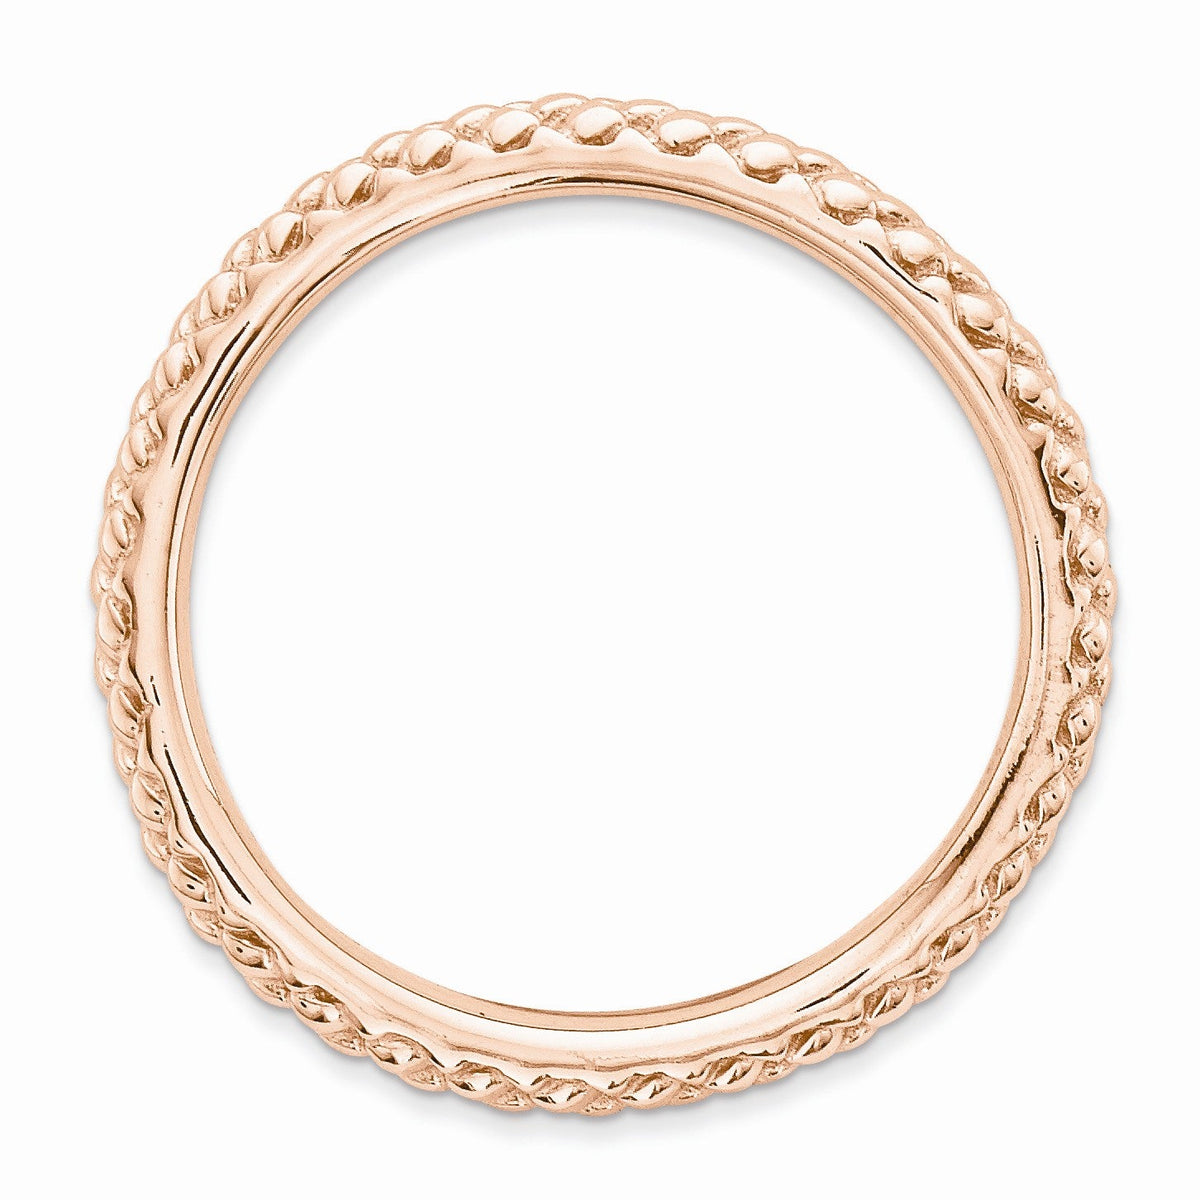 Alternate view of the 2.25mm Stackable 14K Rose Gold Plated Silver Curved Textured Band by The Black Bow Jewelry Co.